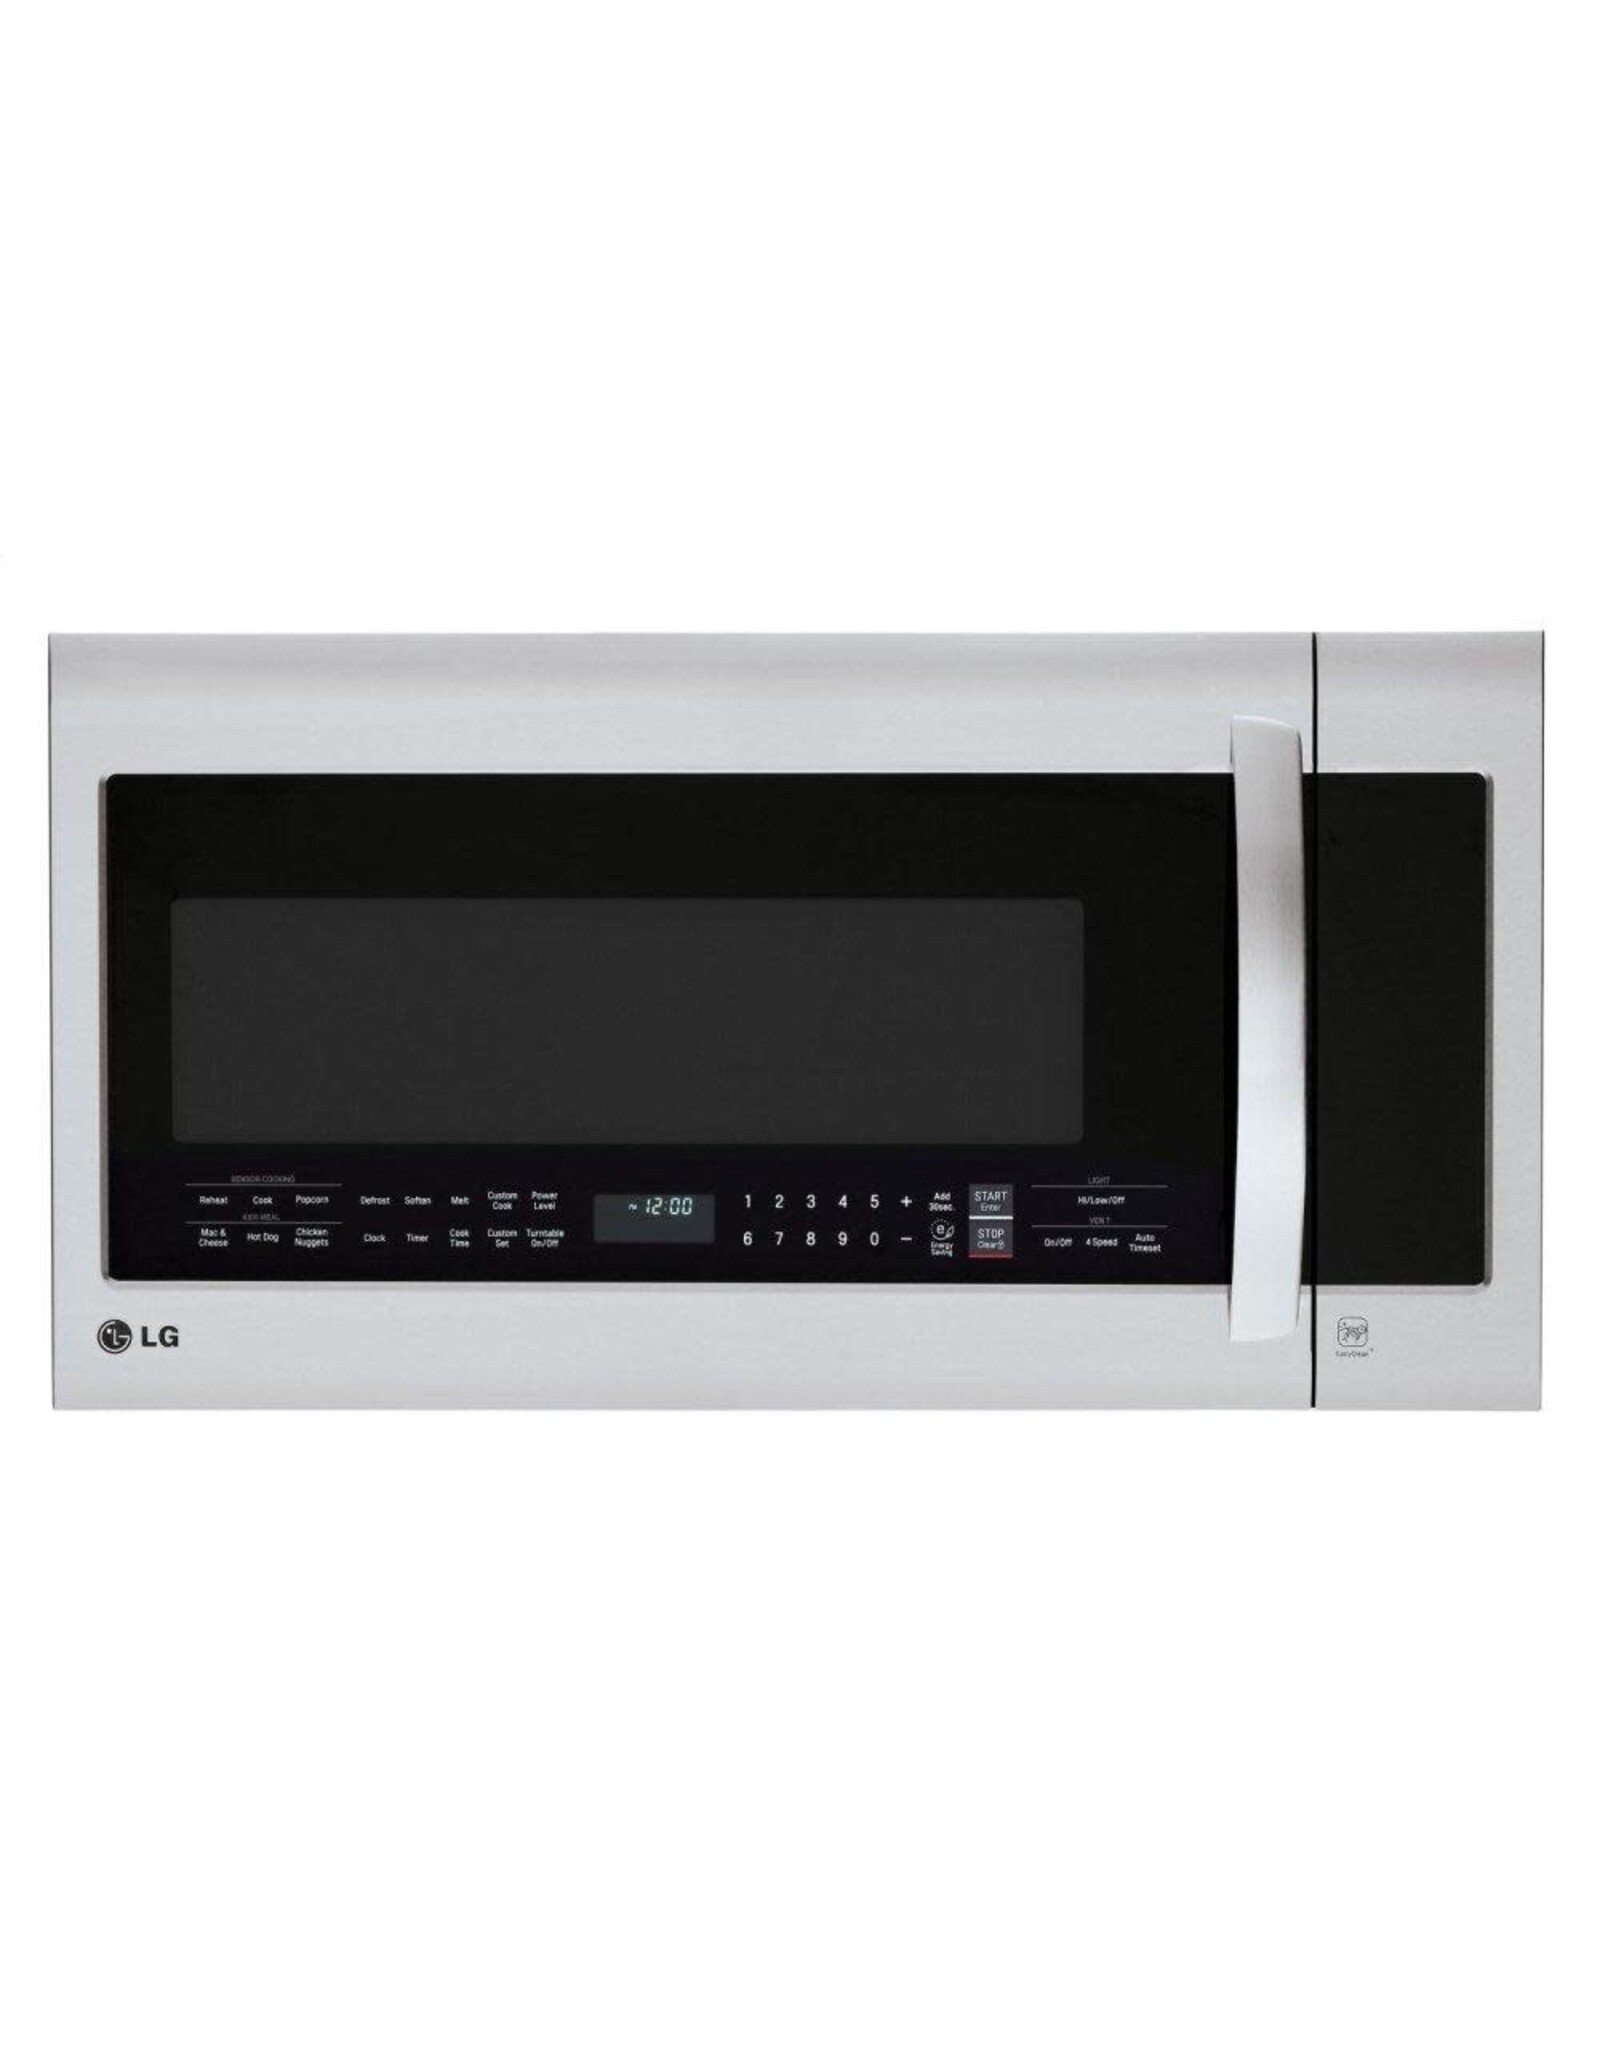 LG Electronics LMVM2033ST 2.0 cu. ft. Over the Range Microwave Oven in Stainless Steel with Sensor Cooking Technology